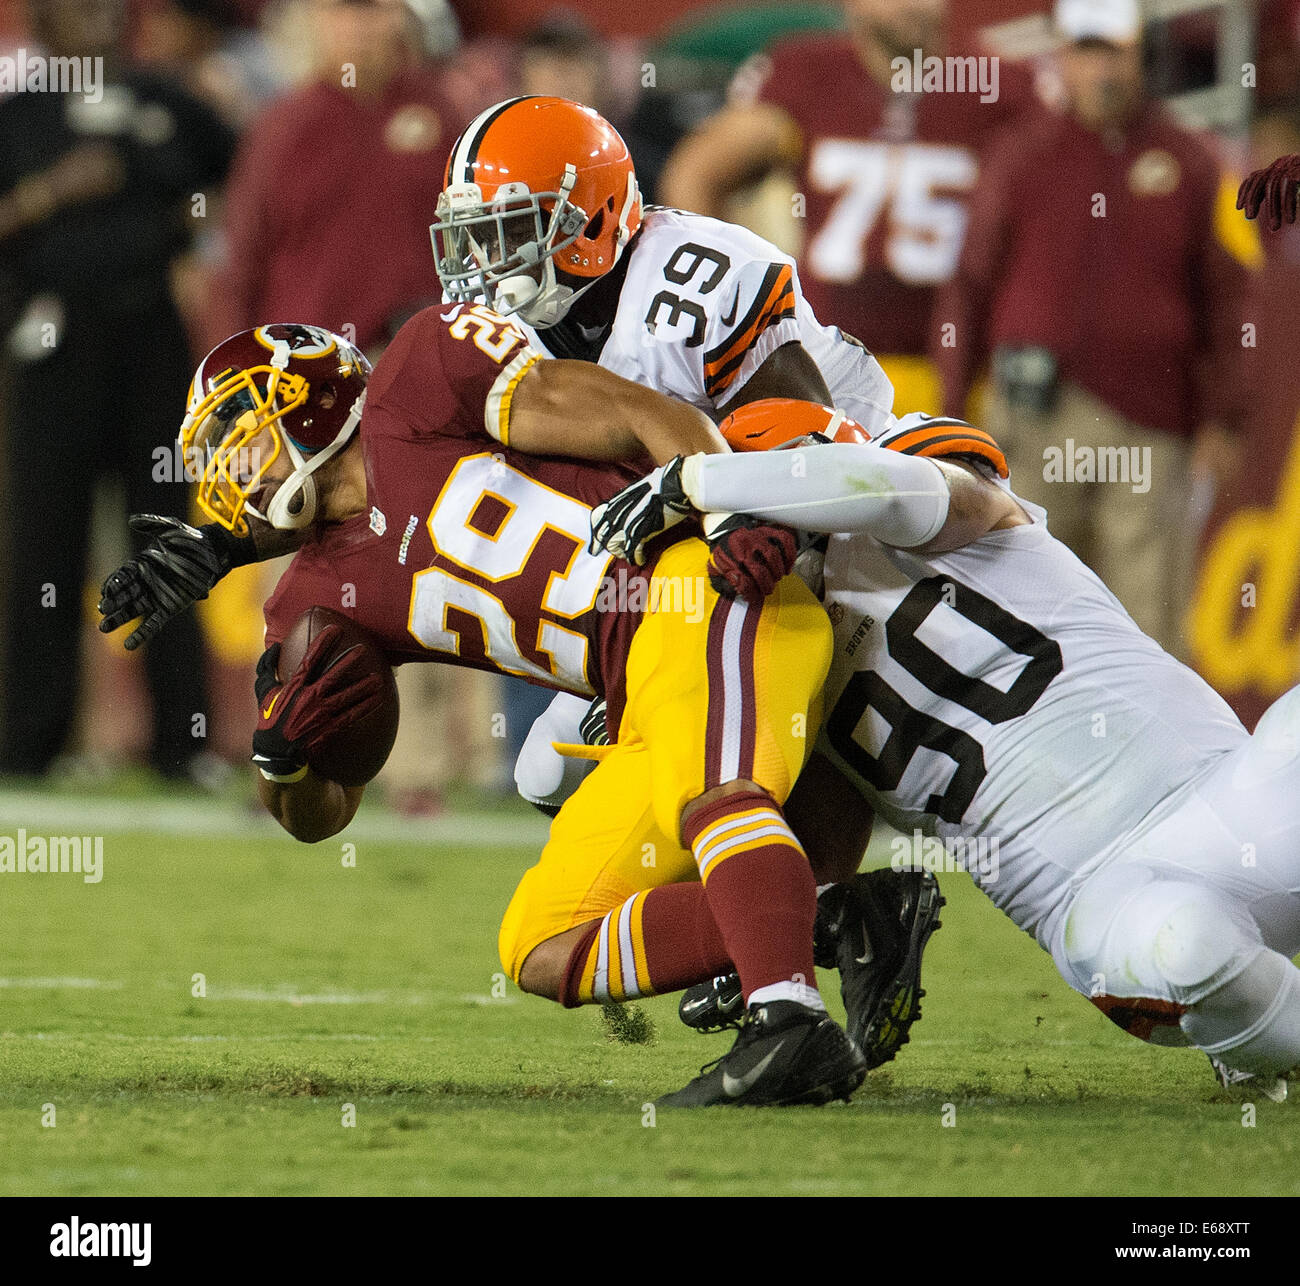 Landover, MD., US. 18th Aug, 2014. Washington Redskins running back Roy Helu (29) is tackled by Cleveland Browns defensive end Billy Winn (90) during the first half of their NFL preseason game at FedEx Field in Landover, MD Monday, August 18, 2014. Credit:  Harry Walker/Alamy Live News Stock Photo